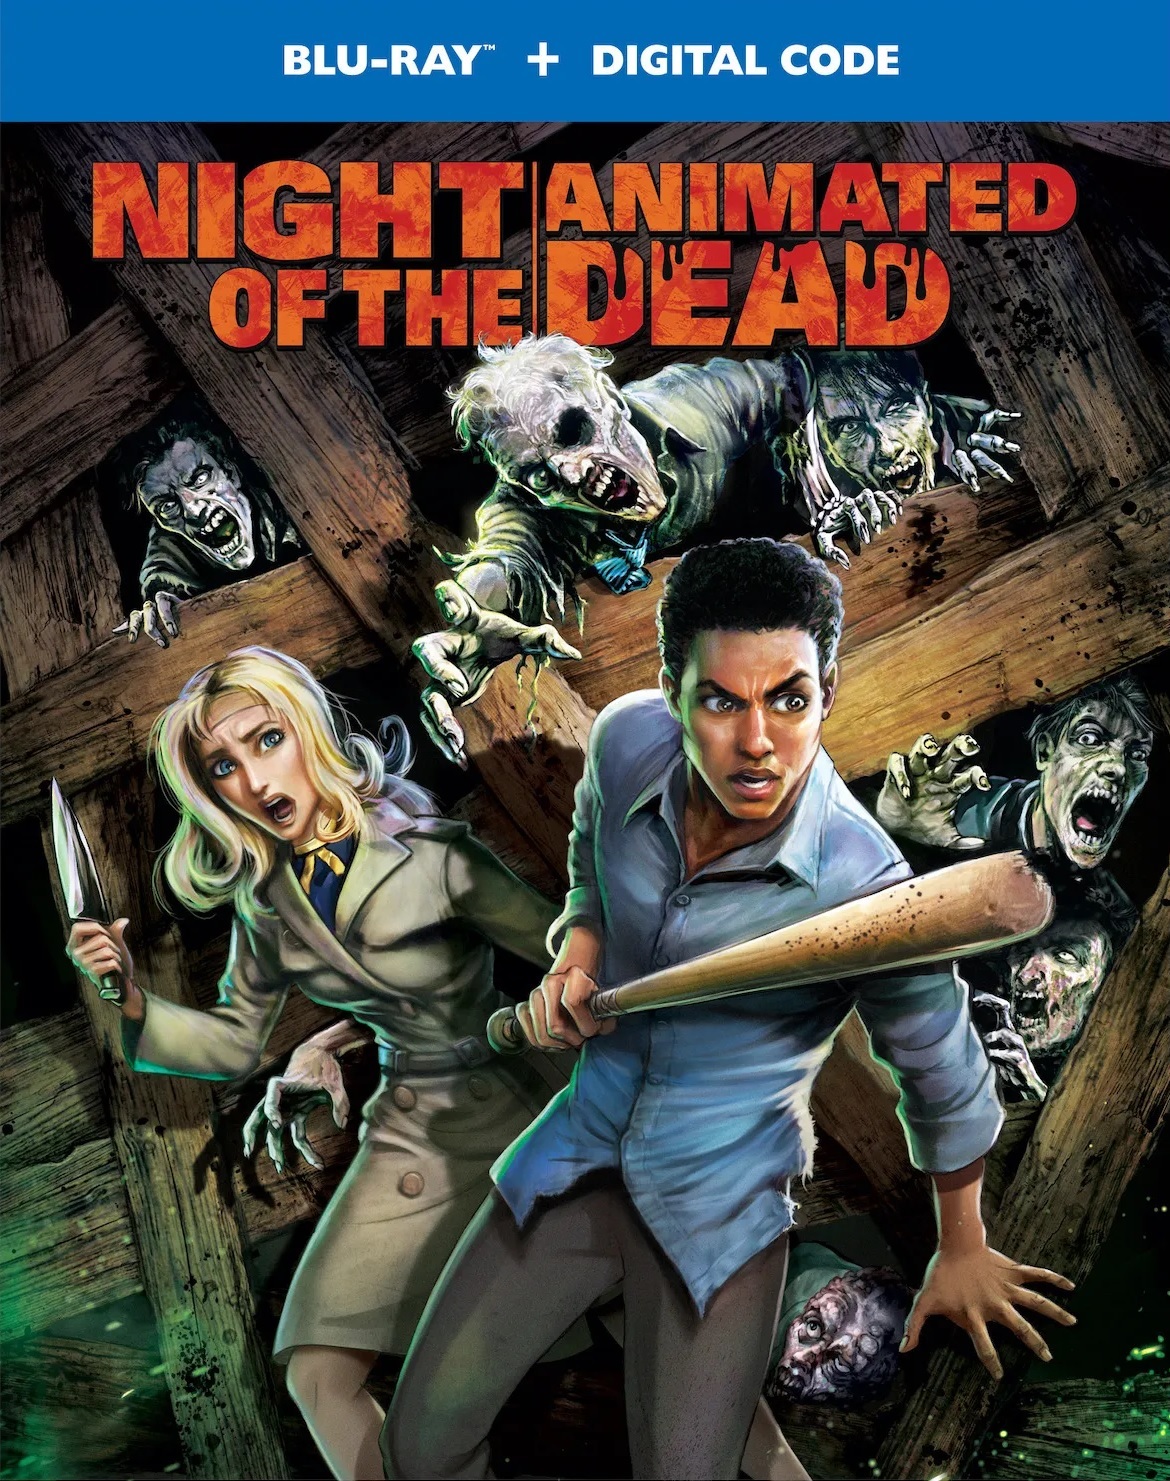 Night of the Animated Dead release